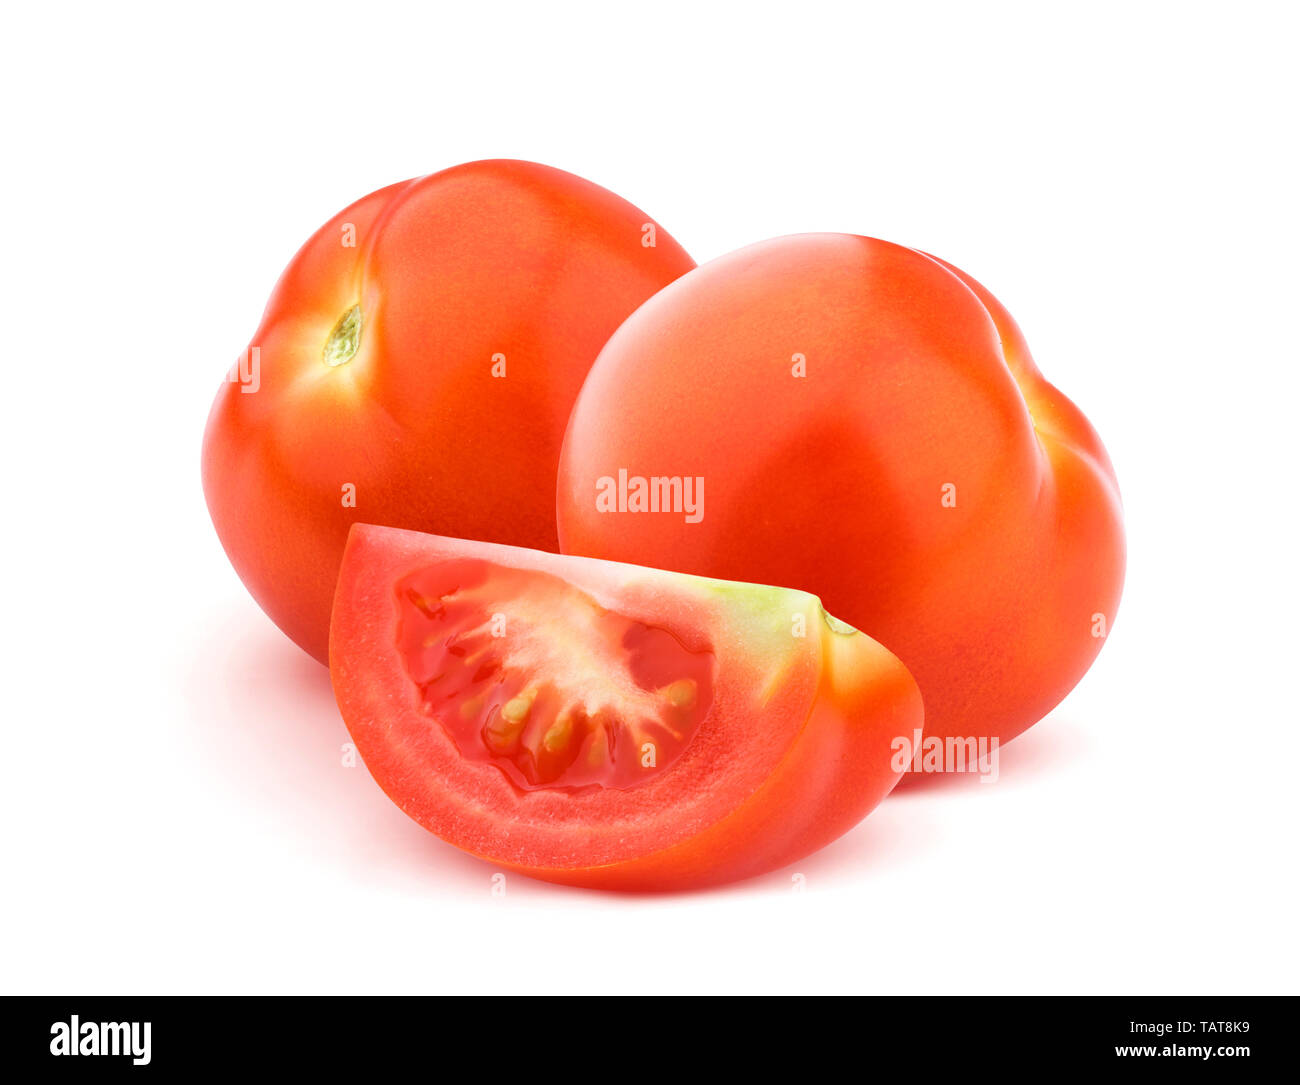 Tomato isolated on white background with clipping path Stock Photo